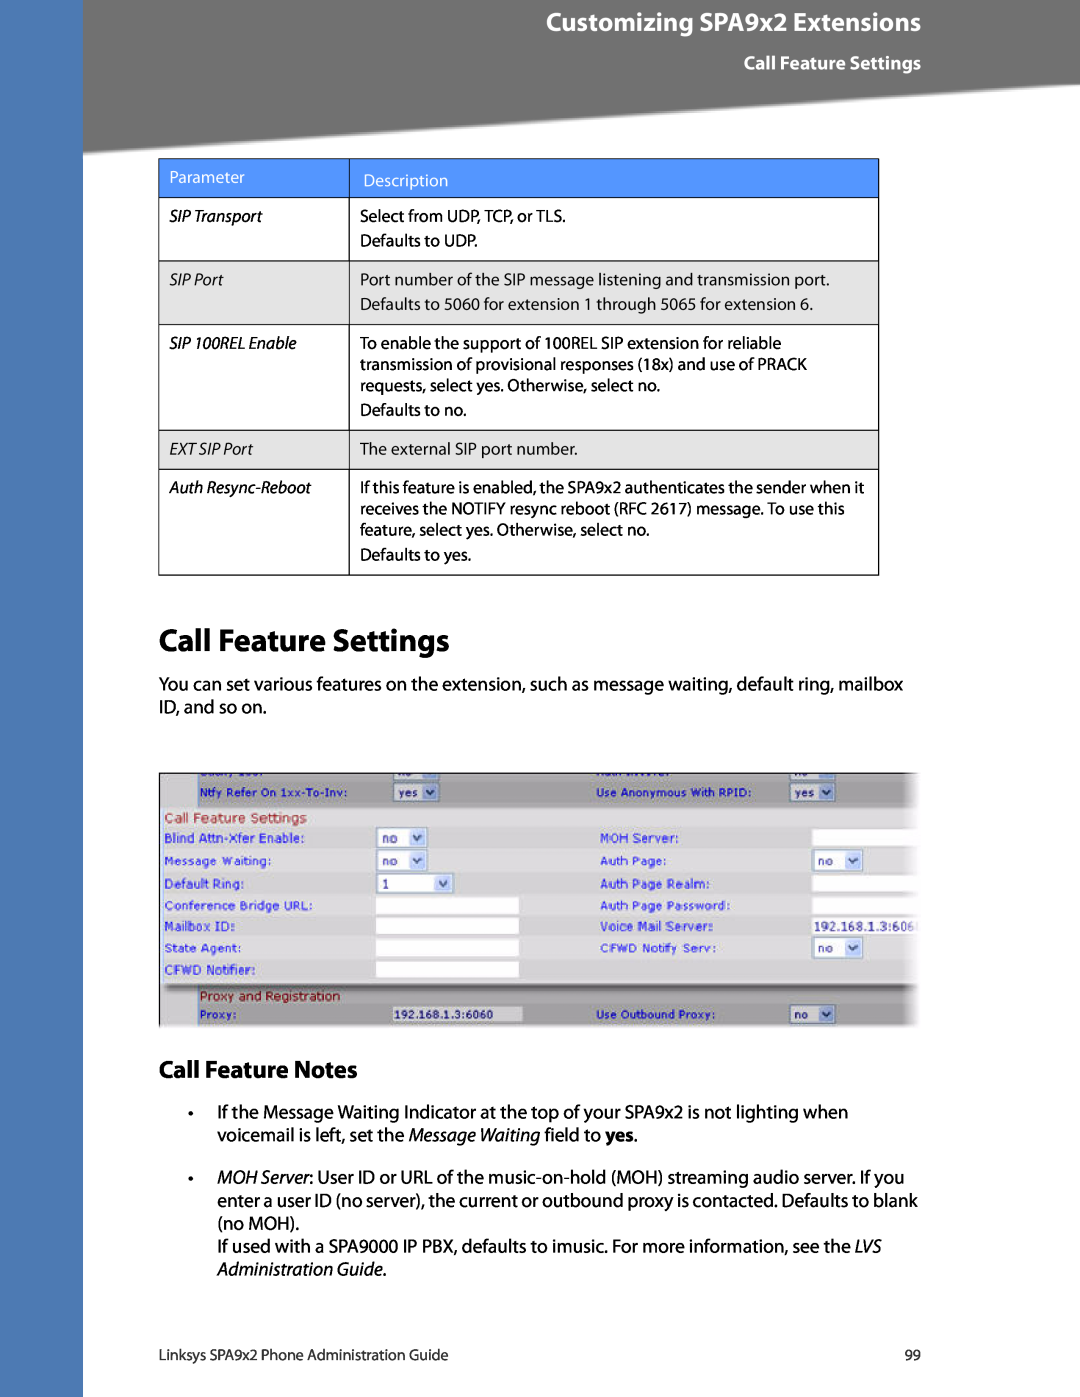 Linksys SPA932, SPA962, SPA942, SPA922 manual Call Feature Settings, Call Feature Notes, Customizing SPA9x2 Extensions 